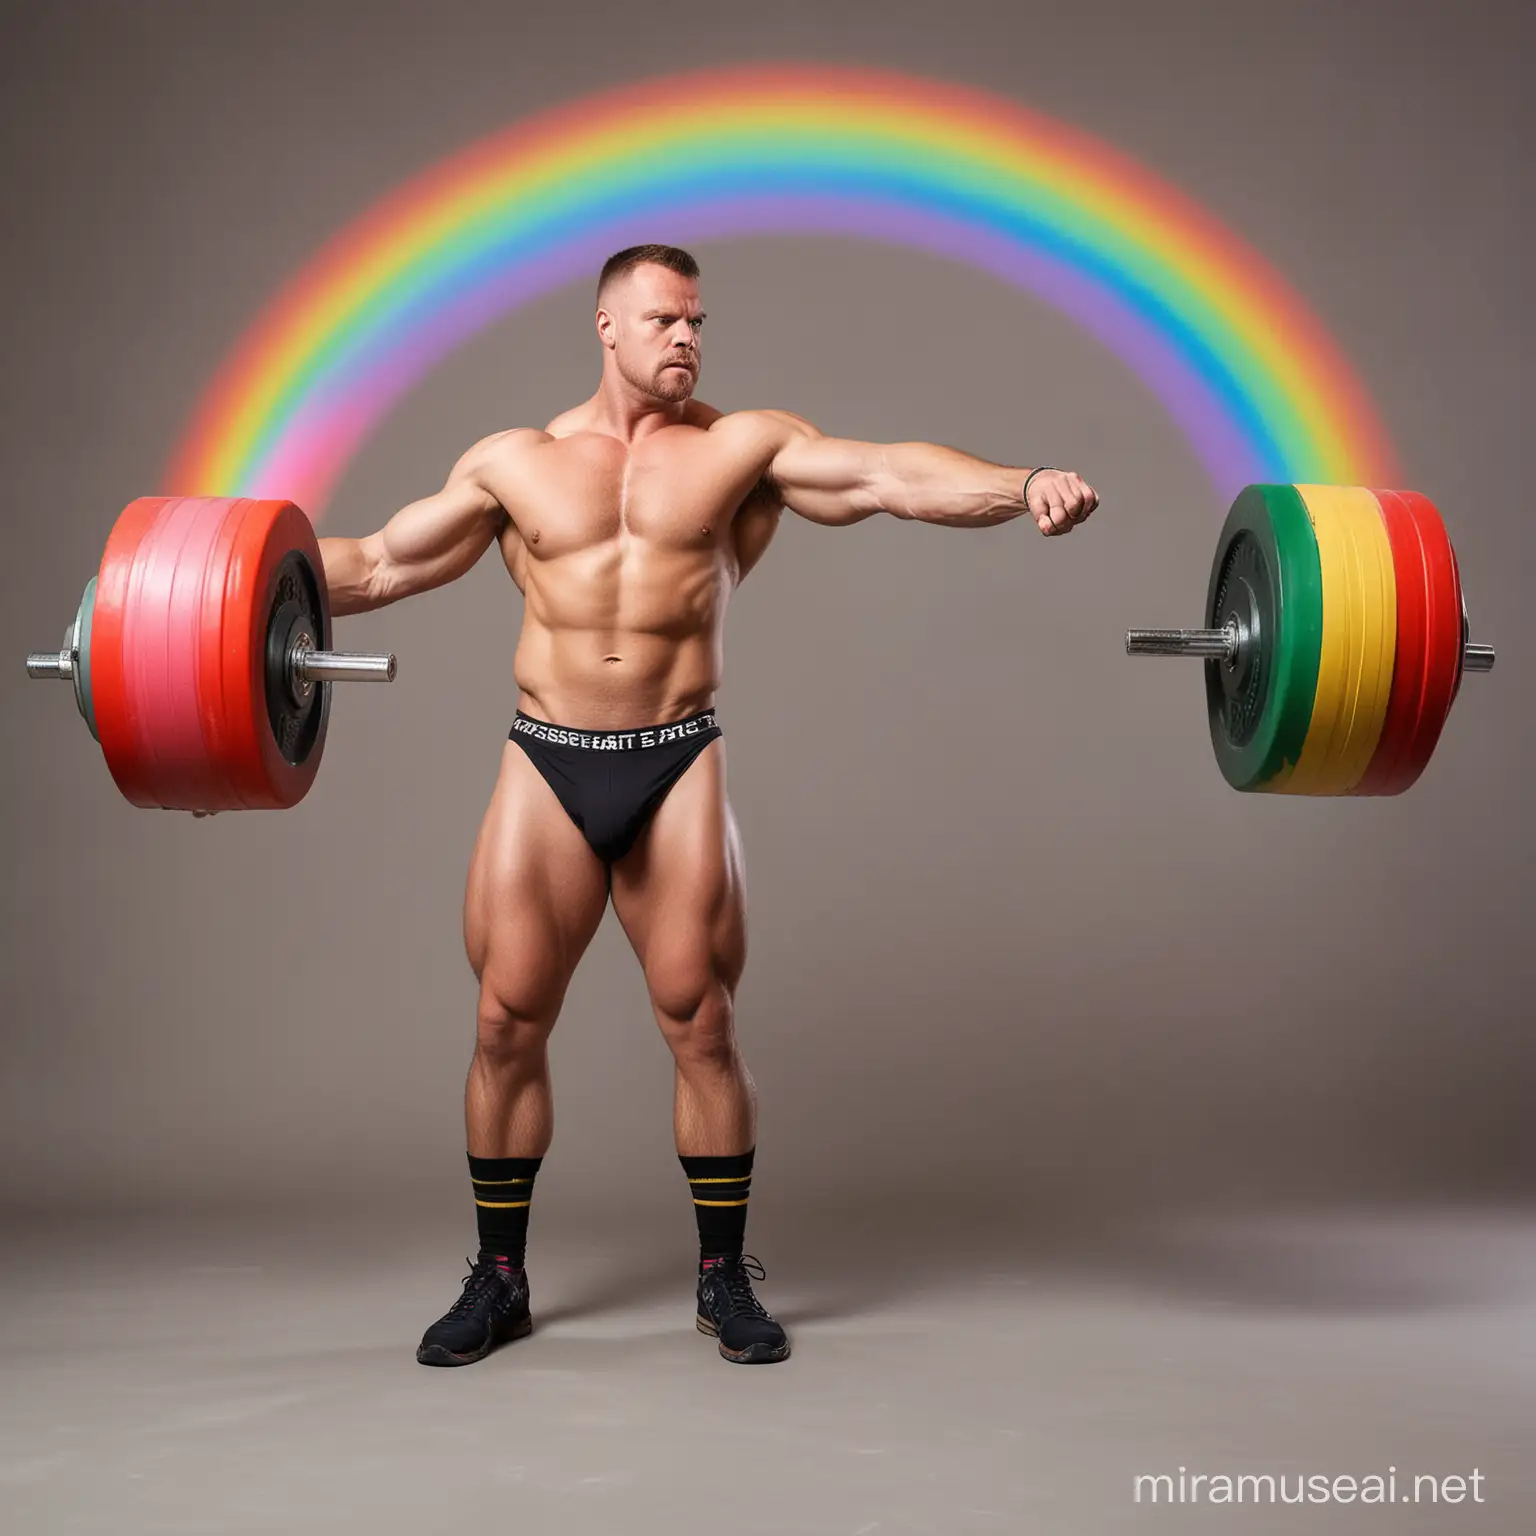 Muscular Man Training with Rainbow Colored Weights in Studio Setting